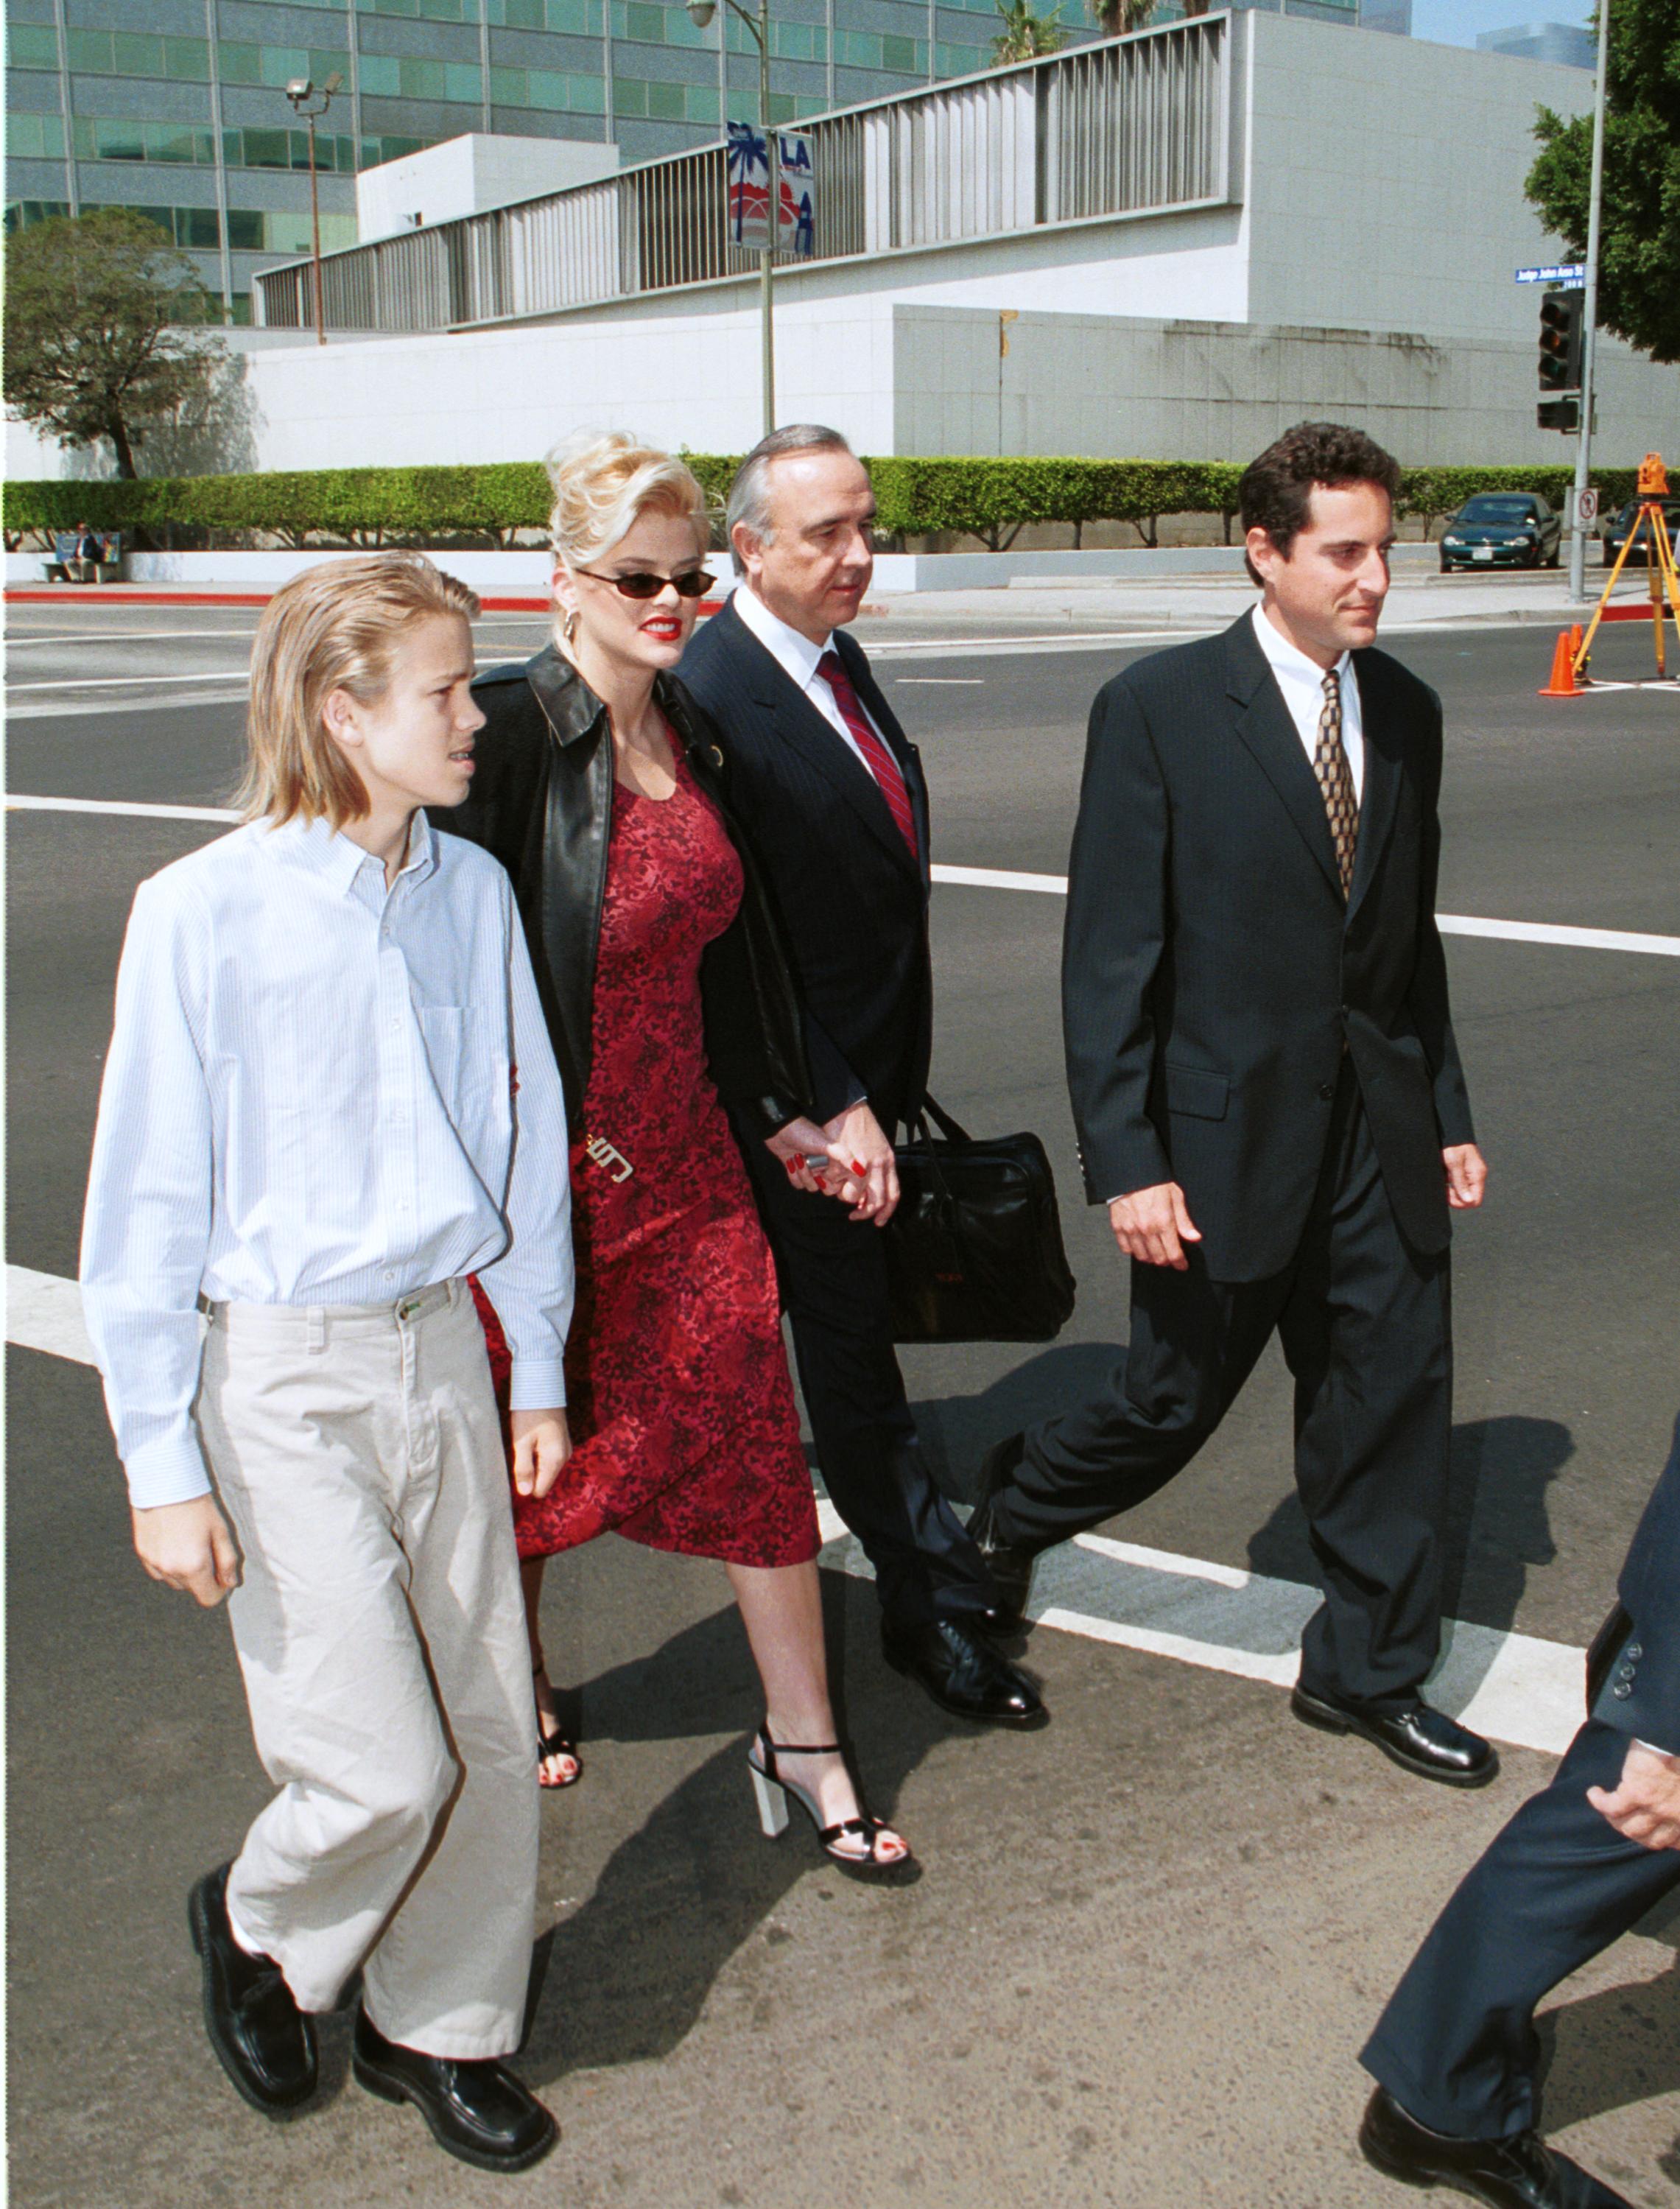 Model Anna Nicole Smith (in sunglasses) with her son Daniel (left) and her attorneys outside the Los Angeles courthouse July 25, 2000 in Los Angeles, Ca. | Source: Getty Images